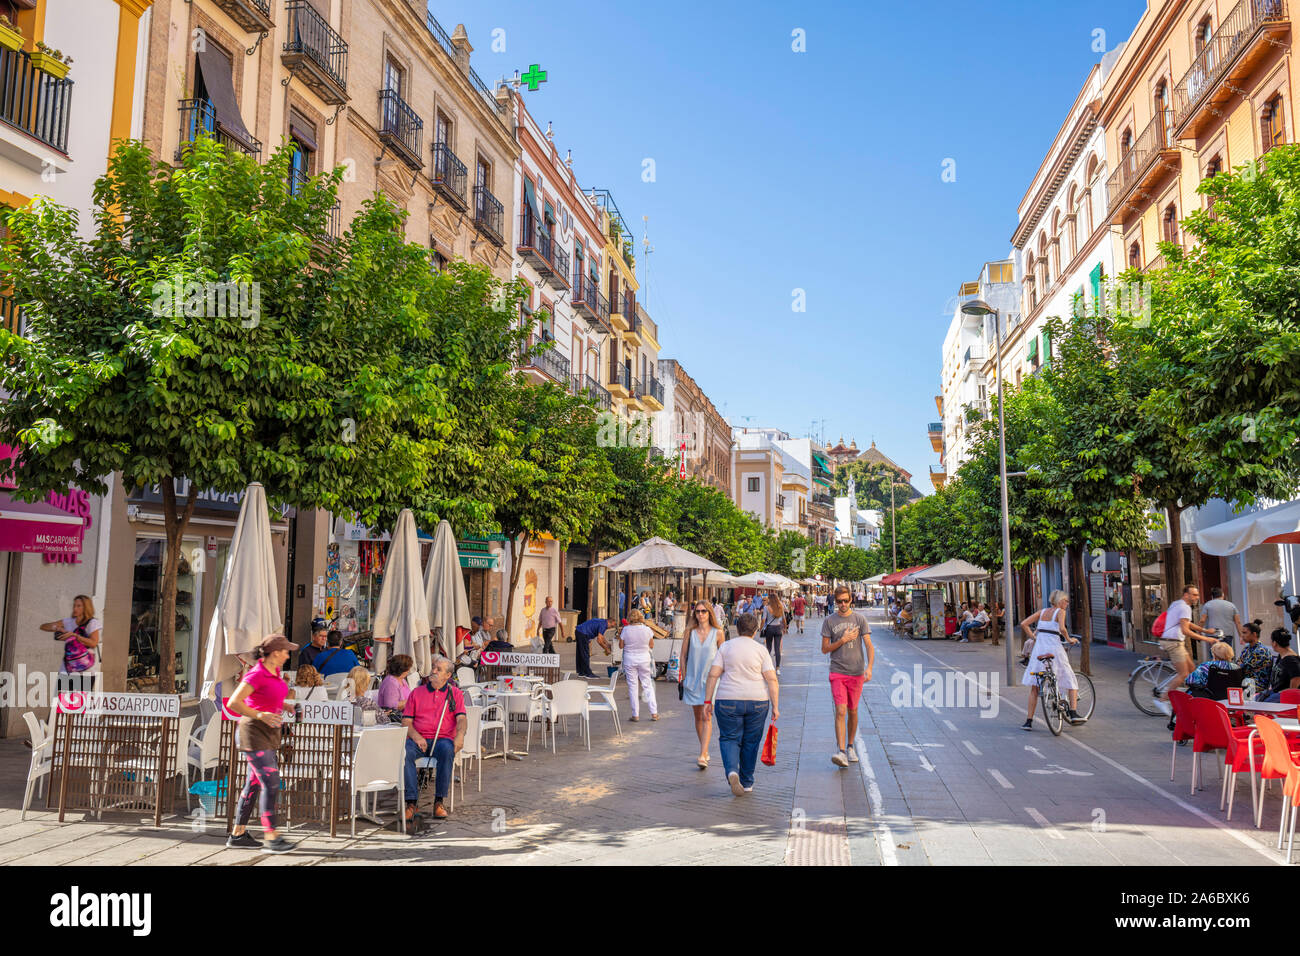 Street pavement cafe on the Calle San Jacinto Main street in the Triana district of Seville Sevilla Seville Spain seville Andalusia Spain EU Europe Stock Photo